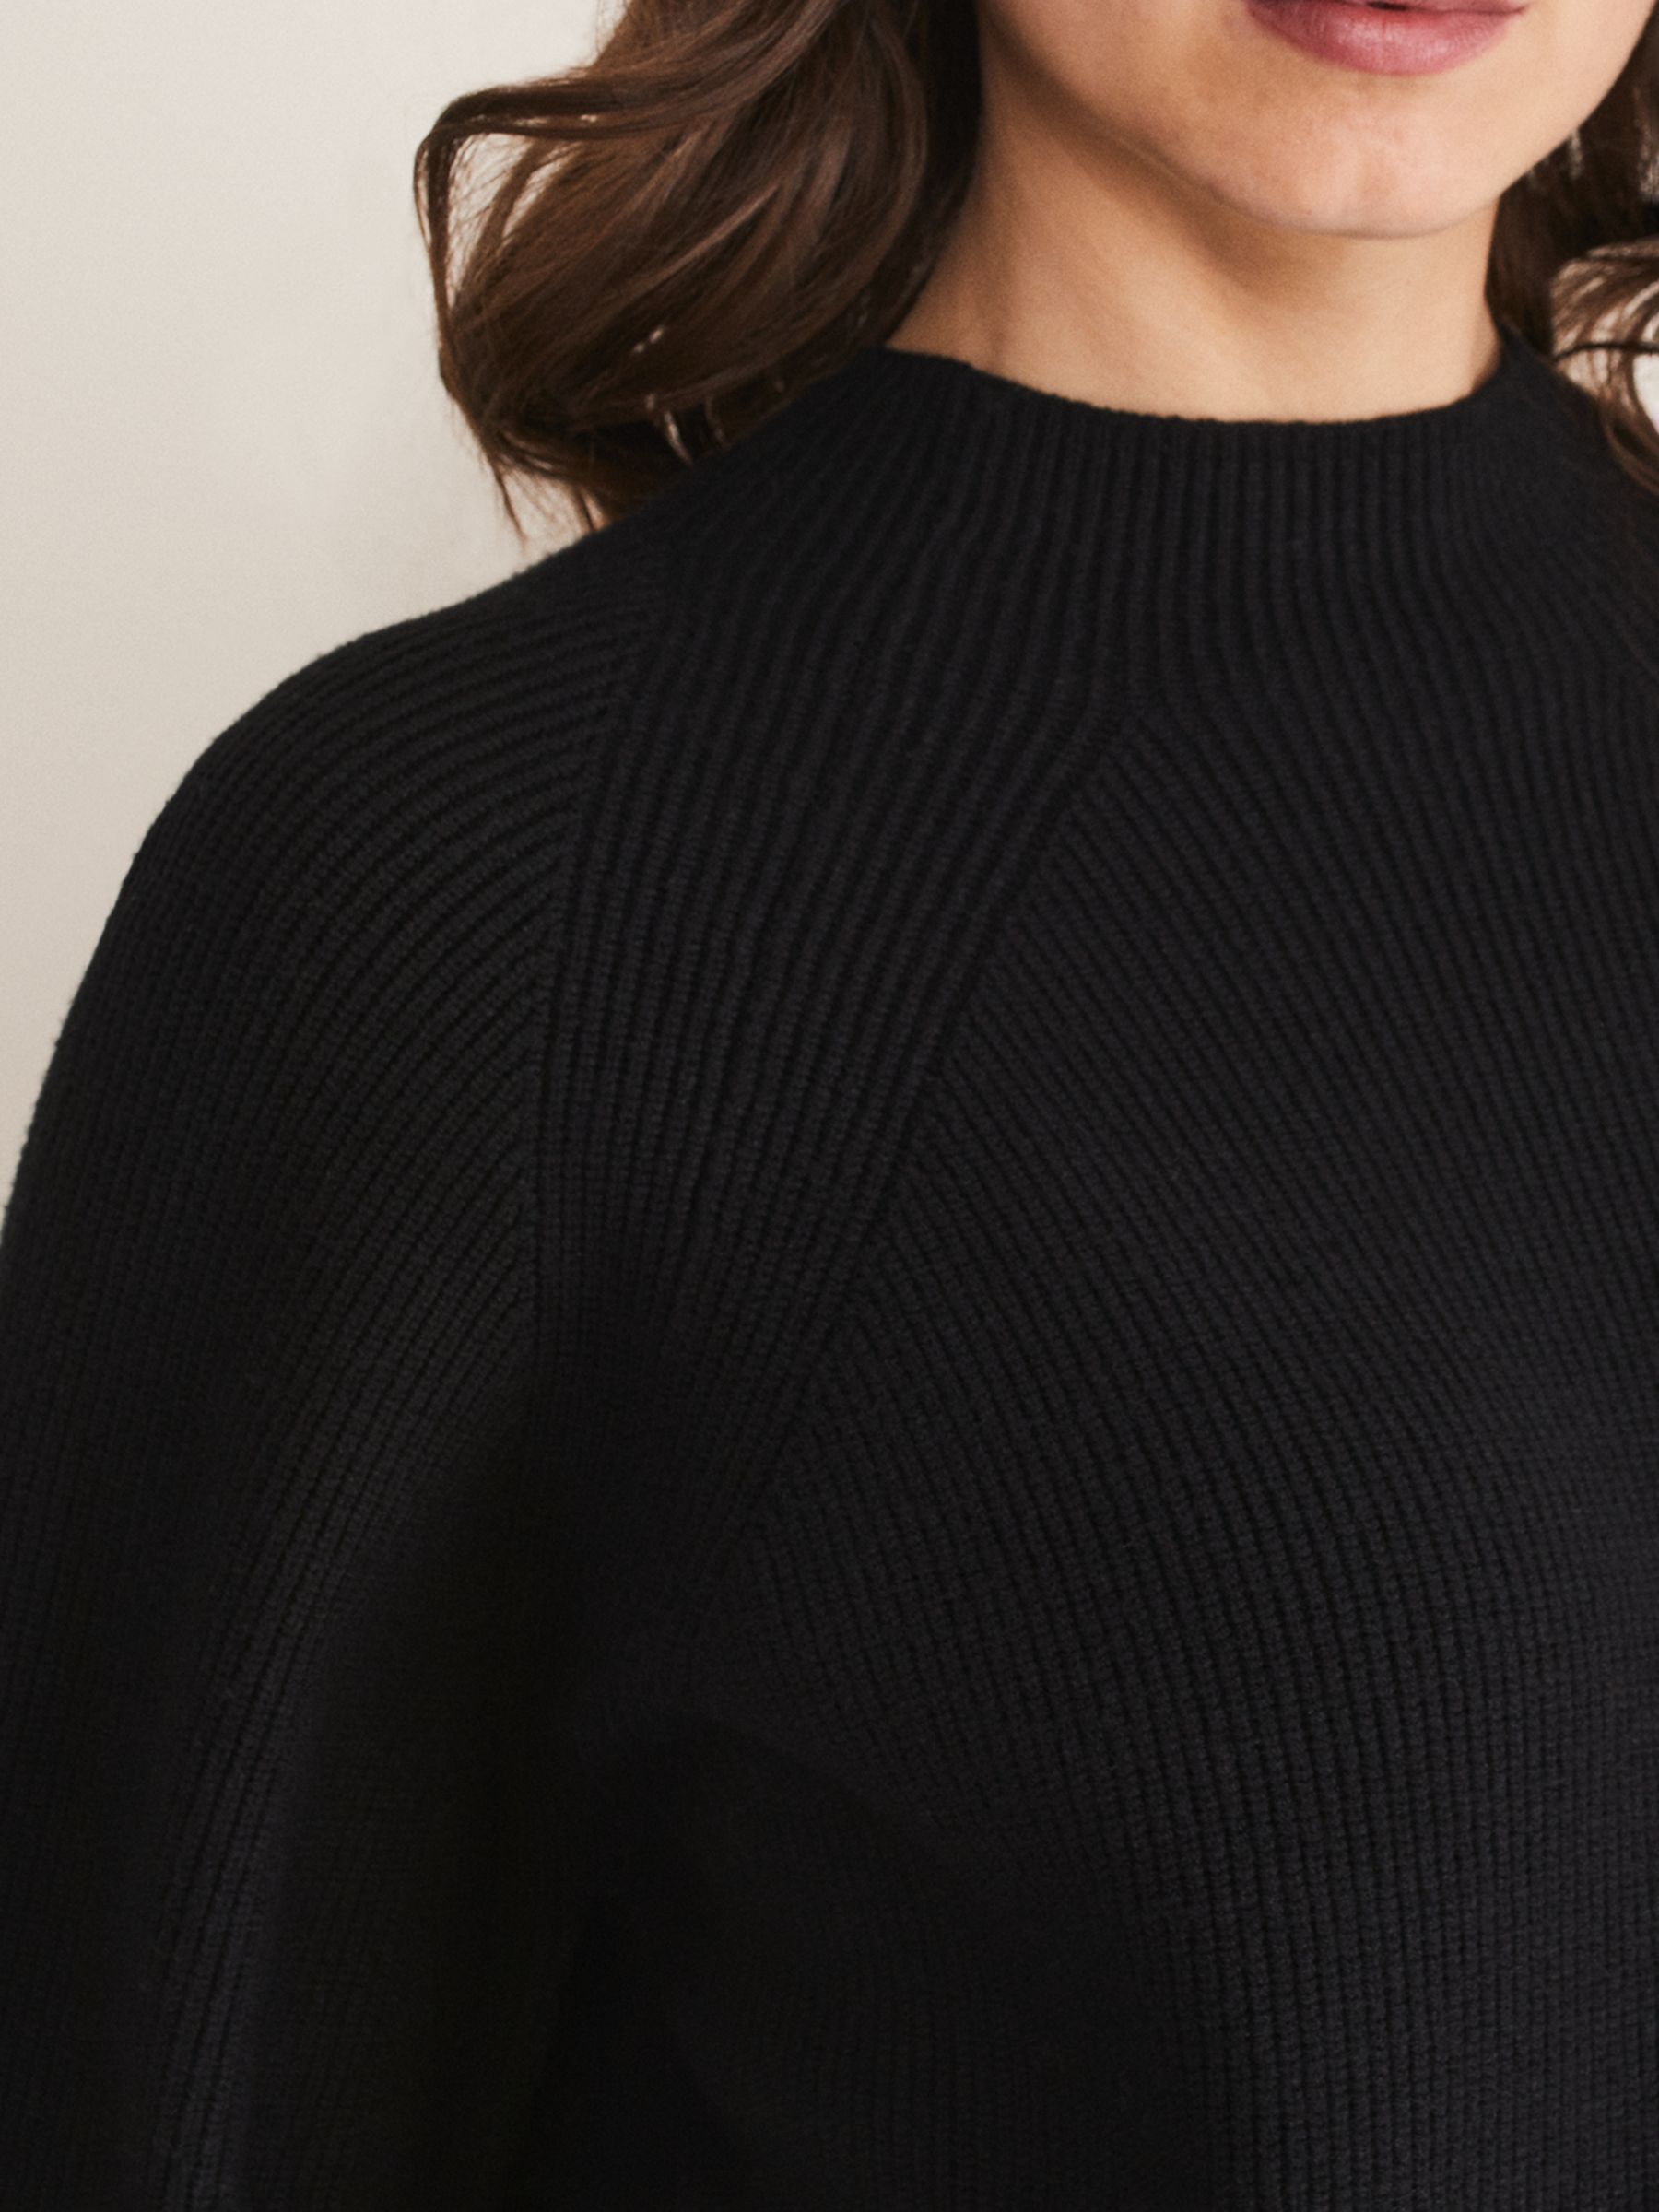 Phase Eight Eliana Knitted Jumper Dress, Black at John Lewis & Partners